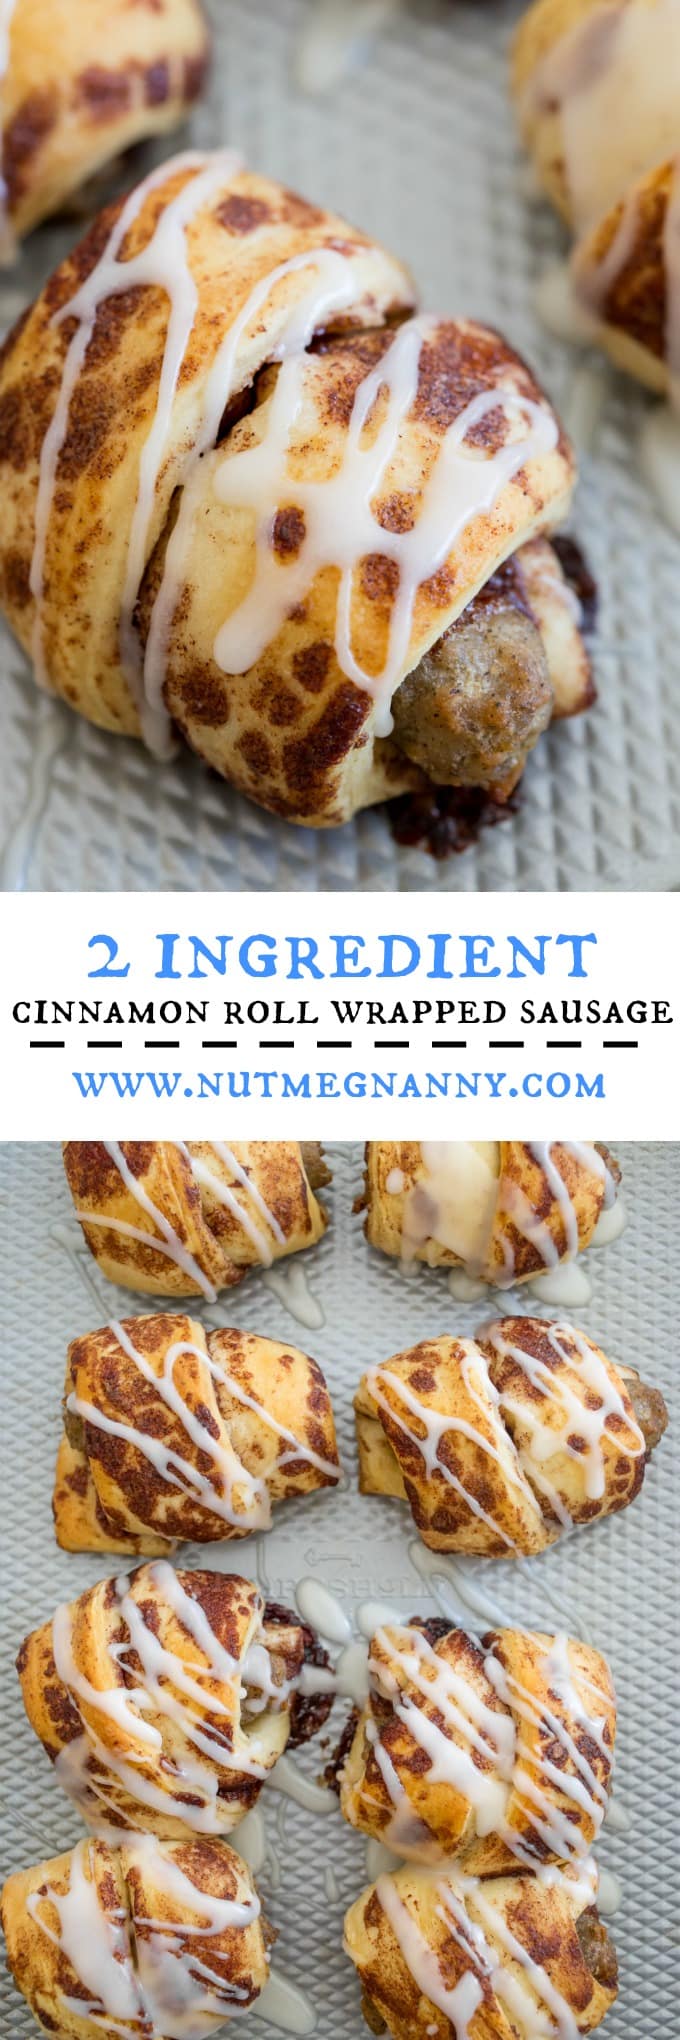 These totally simple 2 ingredient cinnamon roll wrapped sausages are just what your morning needs. Easy to make and the perfect sweet and savory bite.